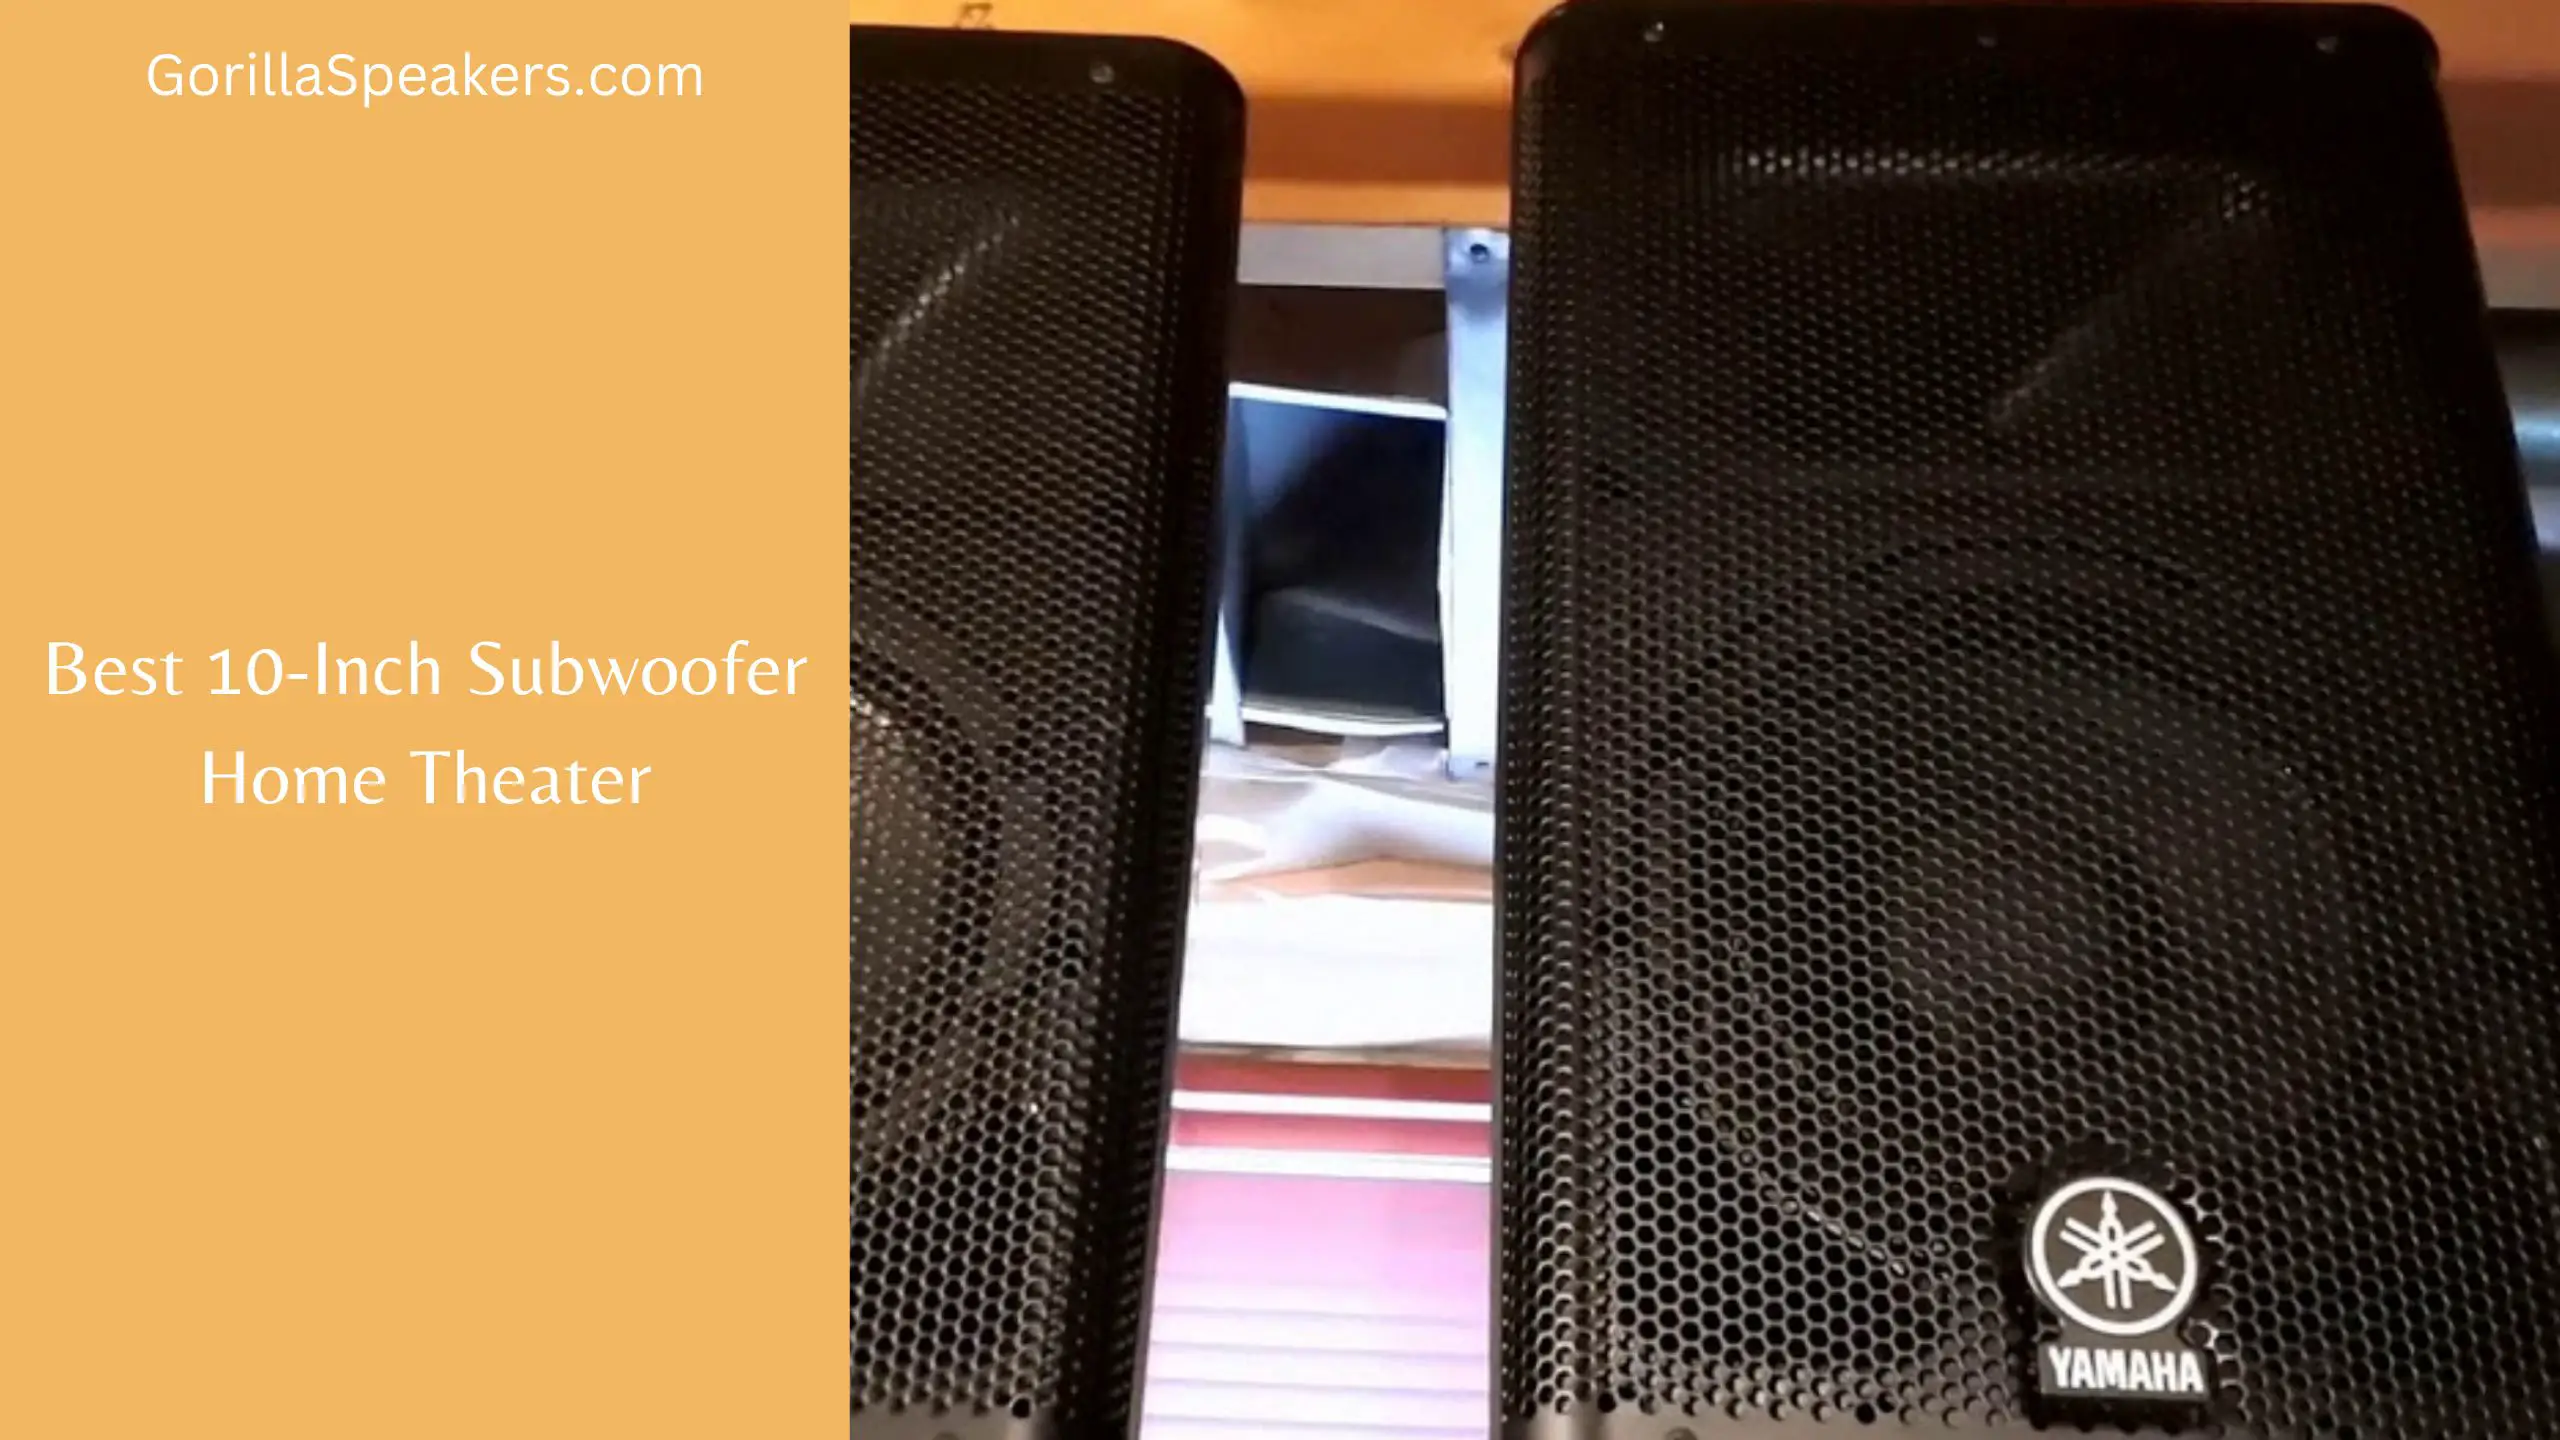 Best 10-Inch Subwoofer Home Theater